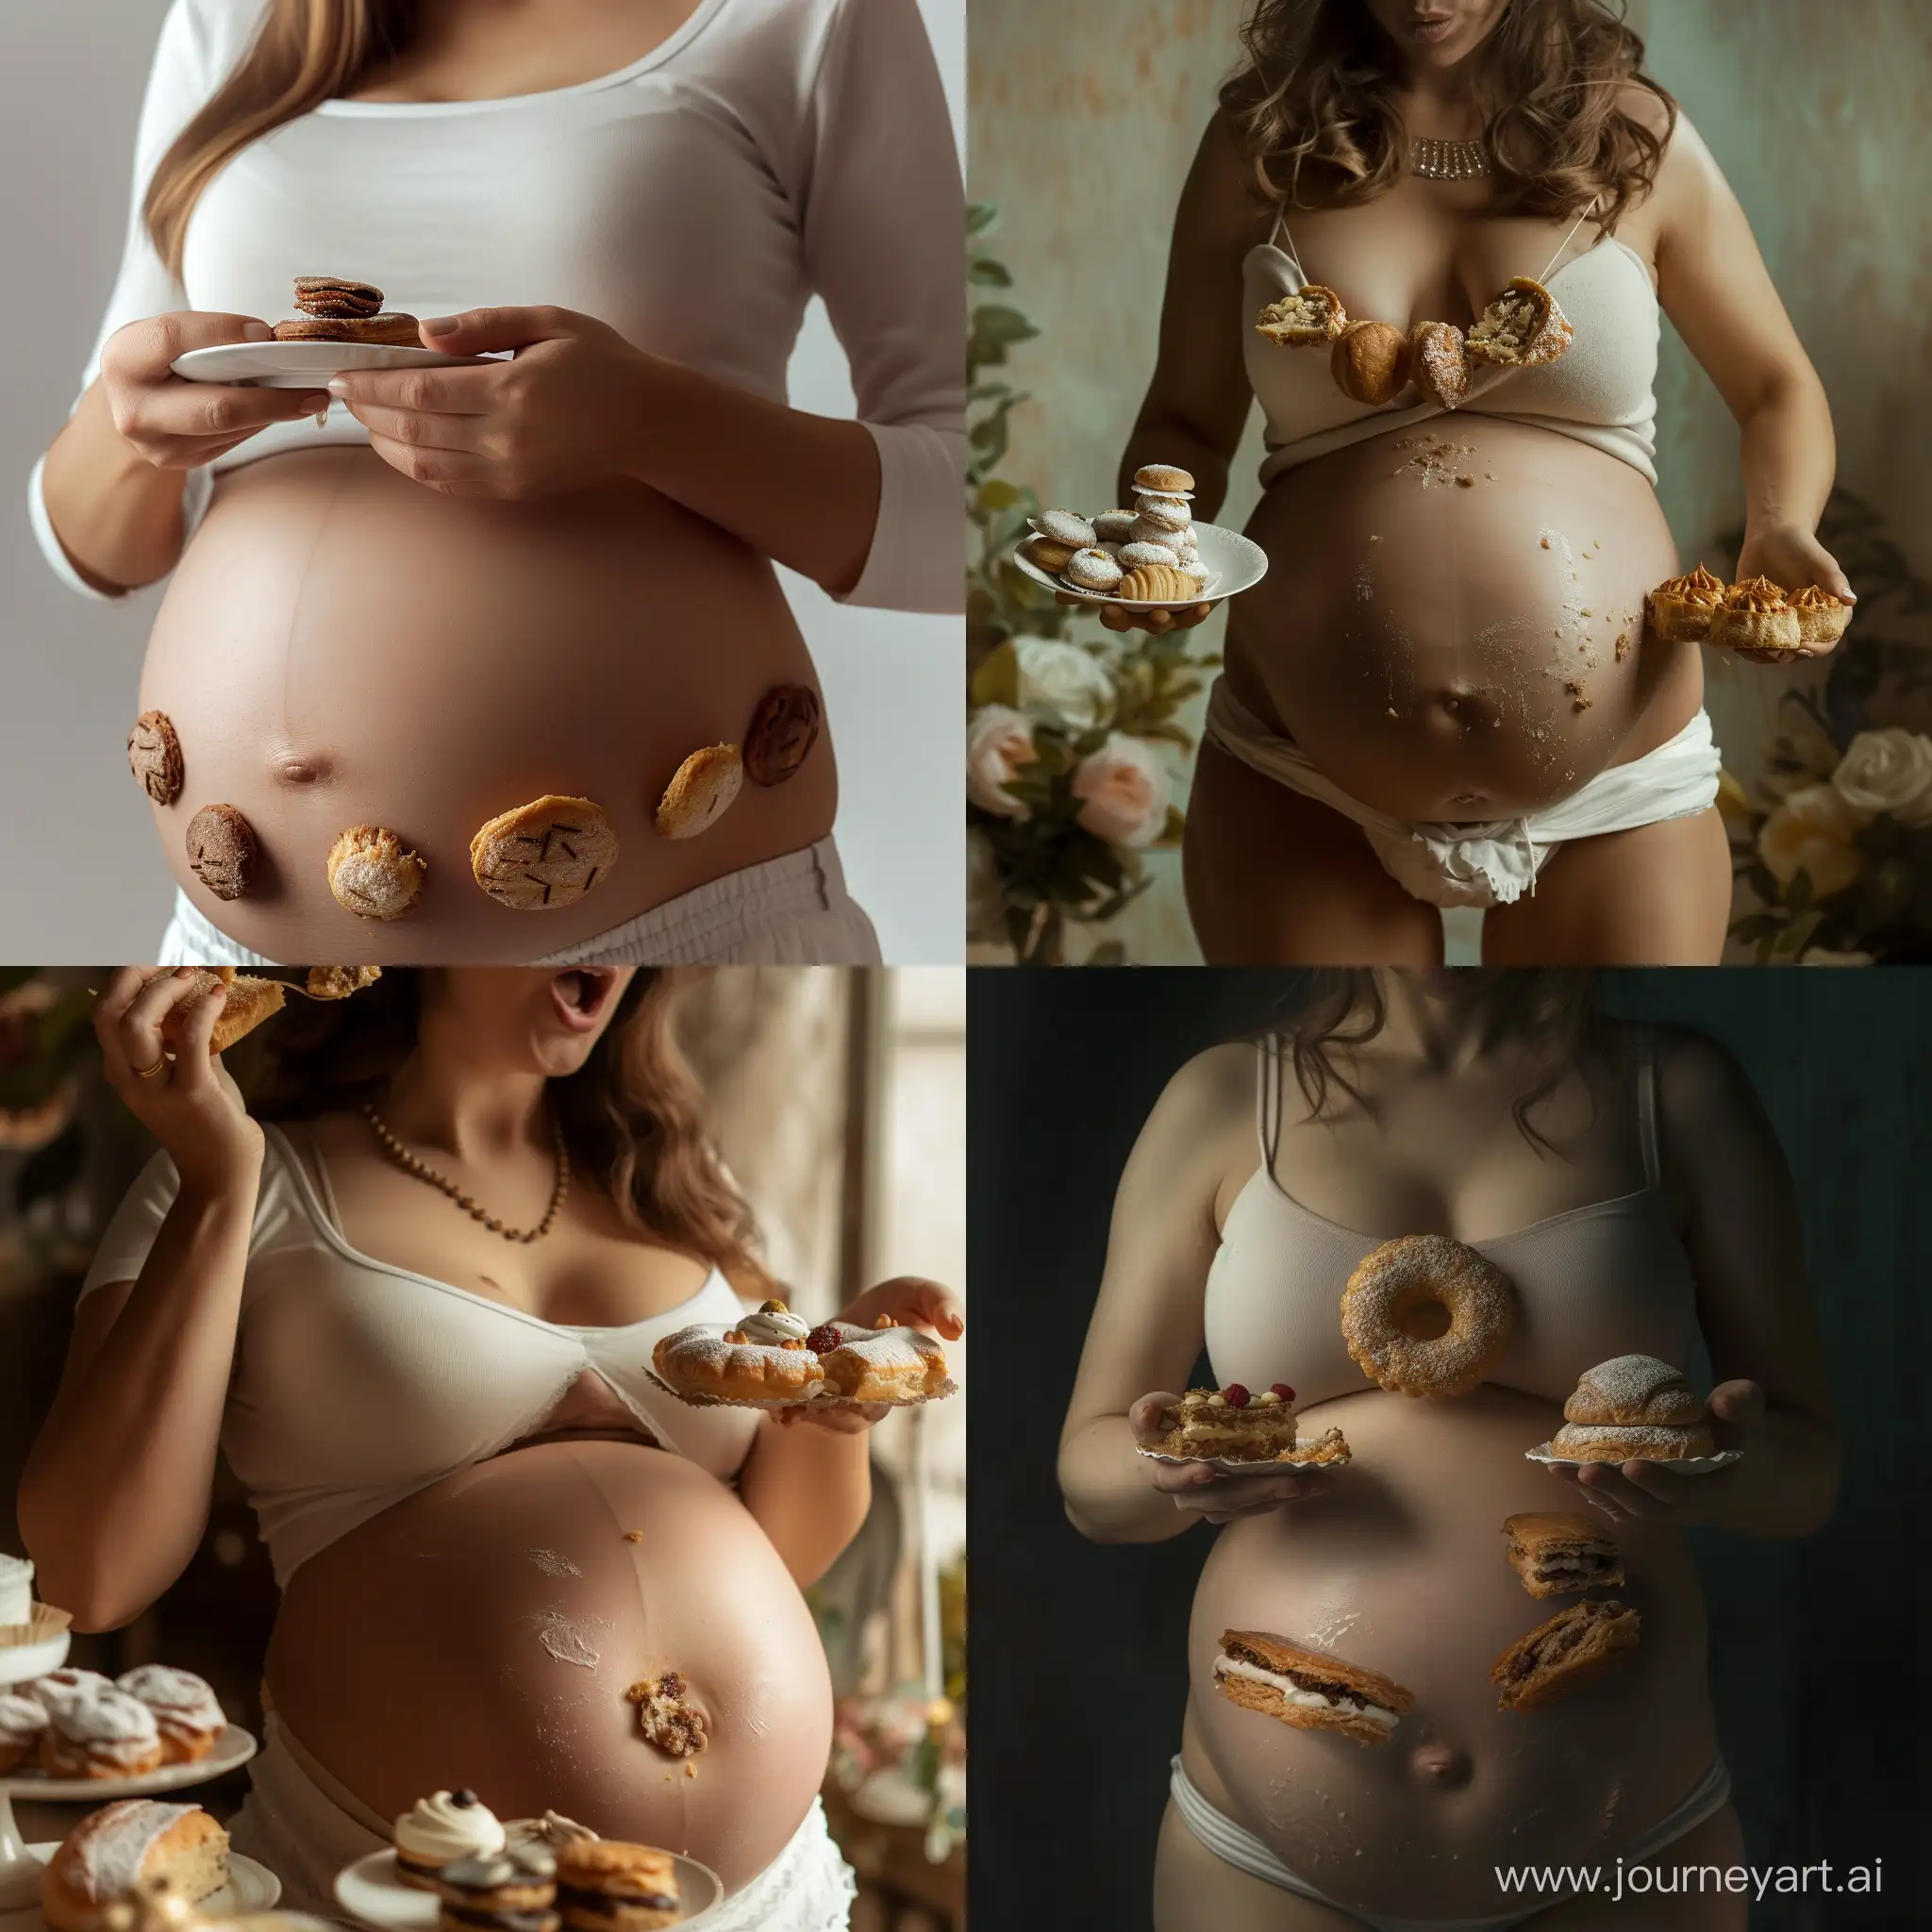 Woman-with-Postpartum-Belly-Indulging-in-Pastries-Realism-Ultra-HD-4K